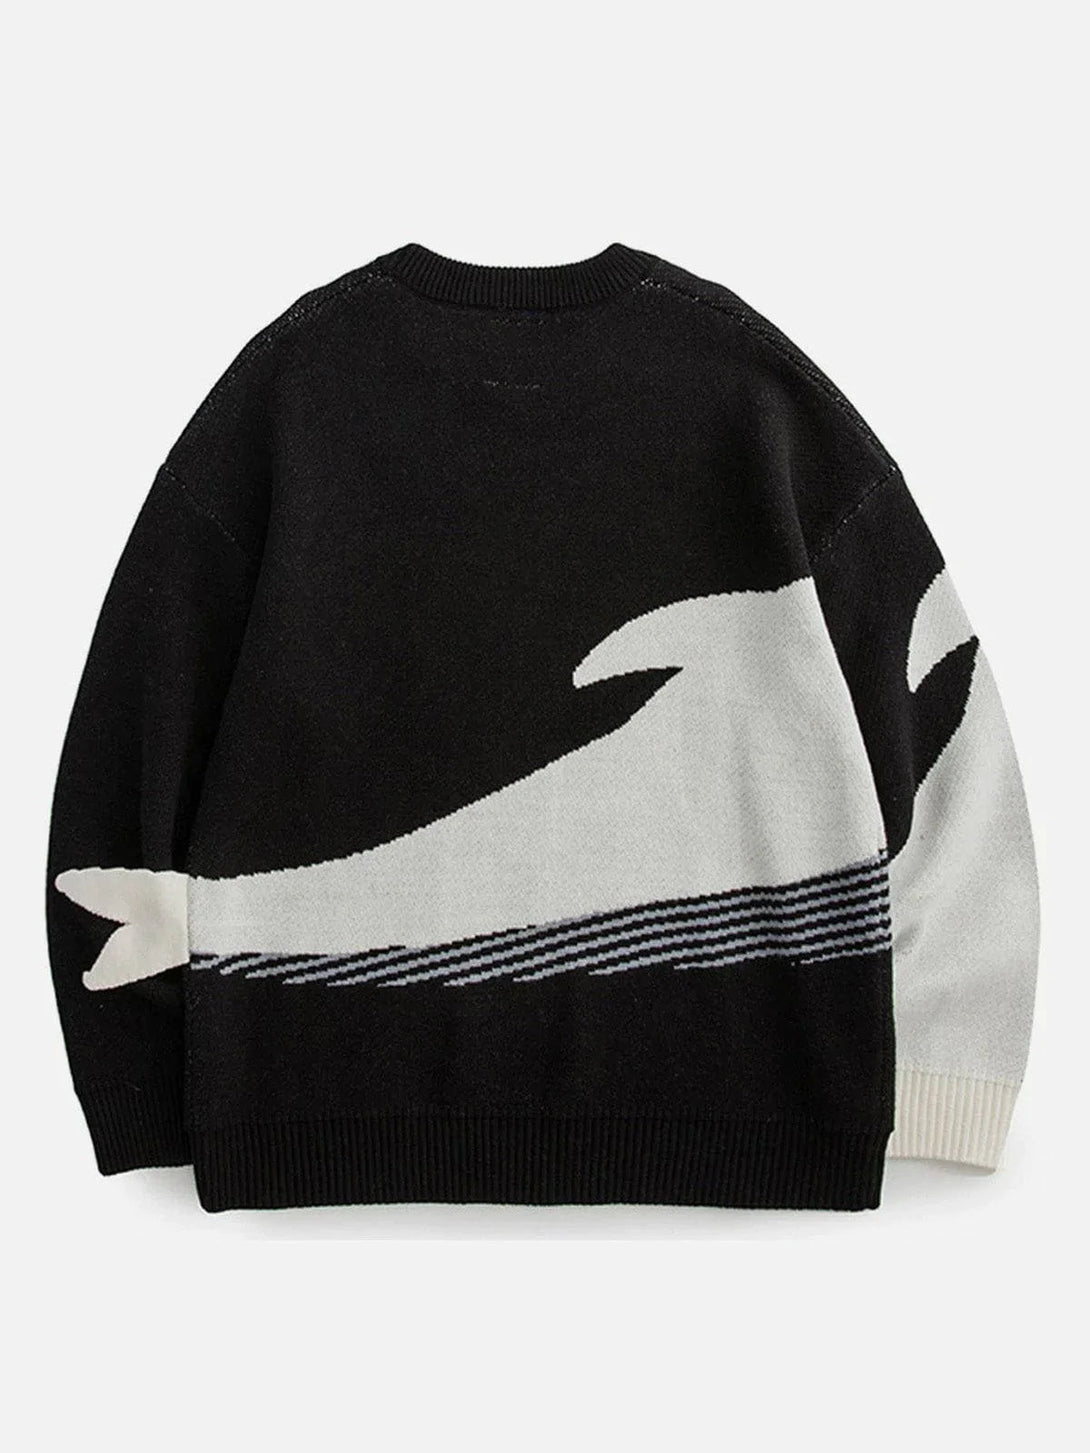 Majesda® - The Loneliest Whale Knit Sweater outfit ideas streetwear fashion